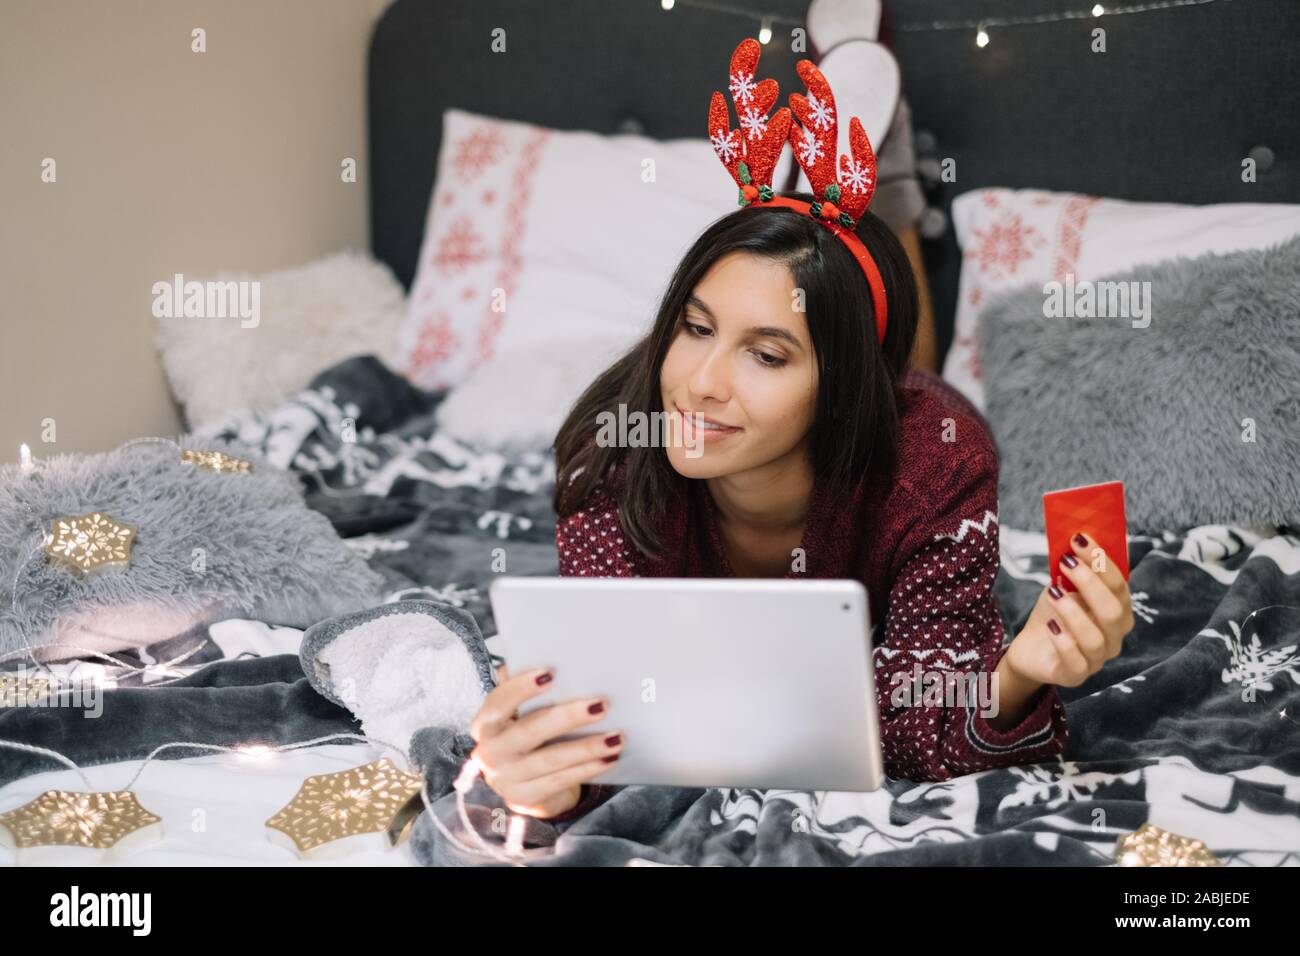 Young girl laying on stomach on bed while using tablet Stock Photo